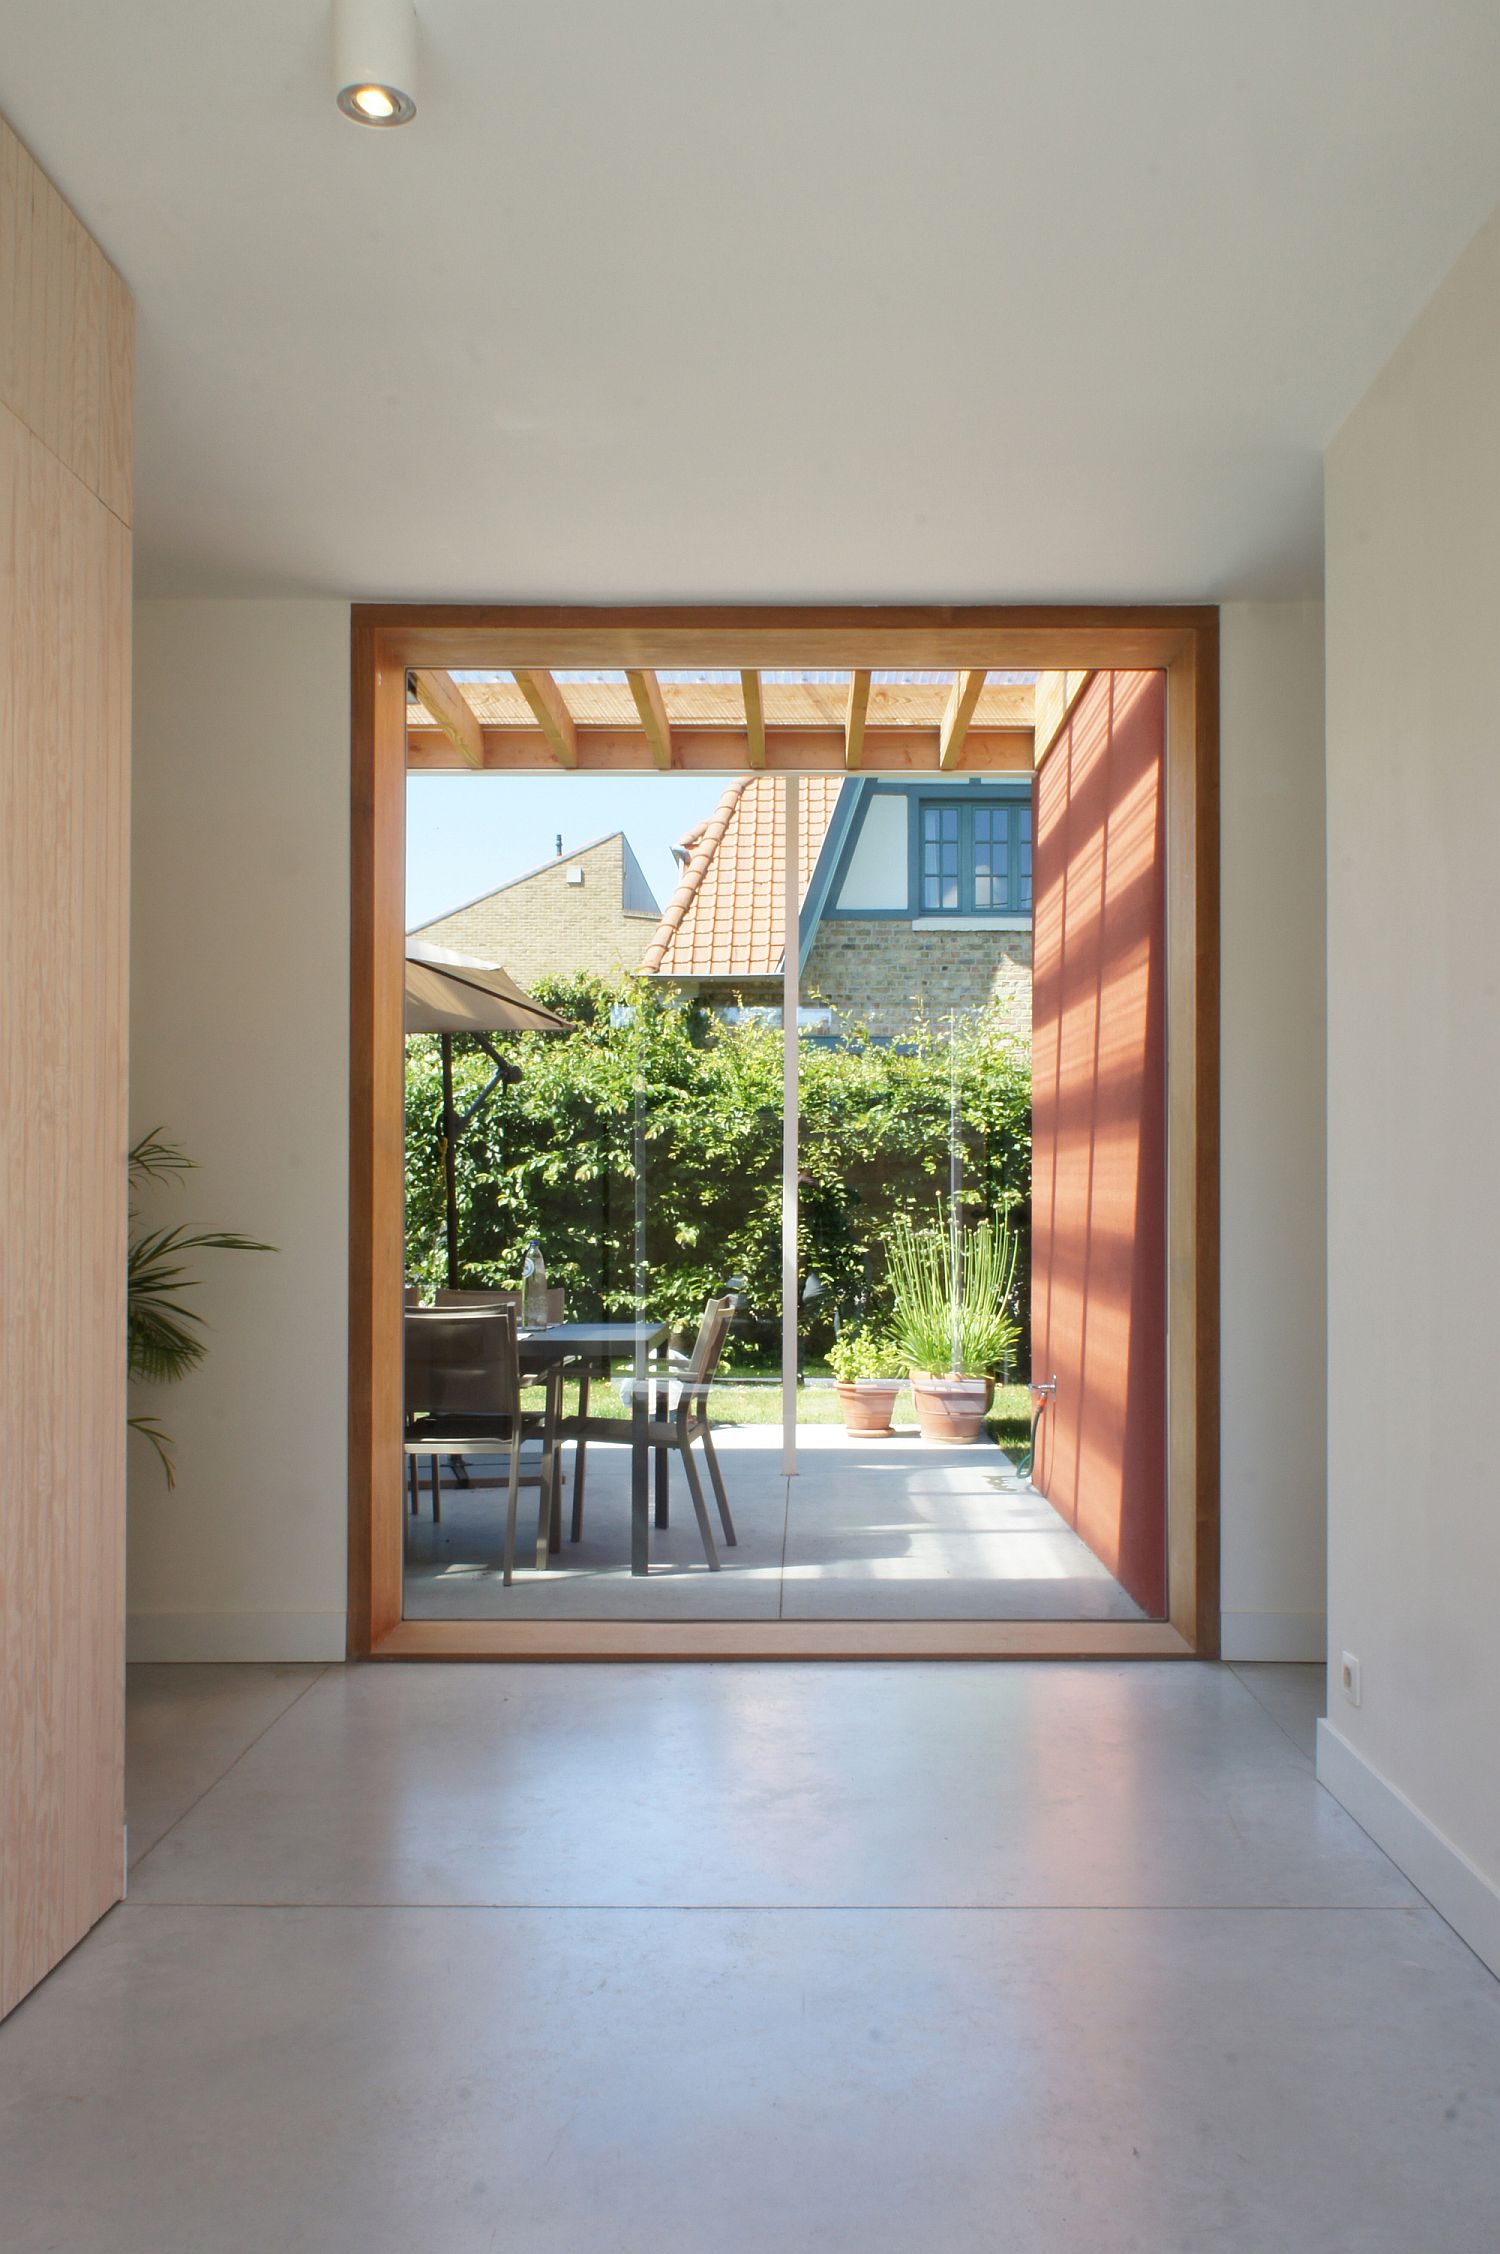 Large openings and windows bring in ample natural light